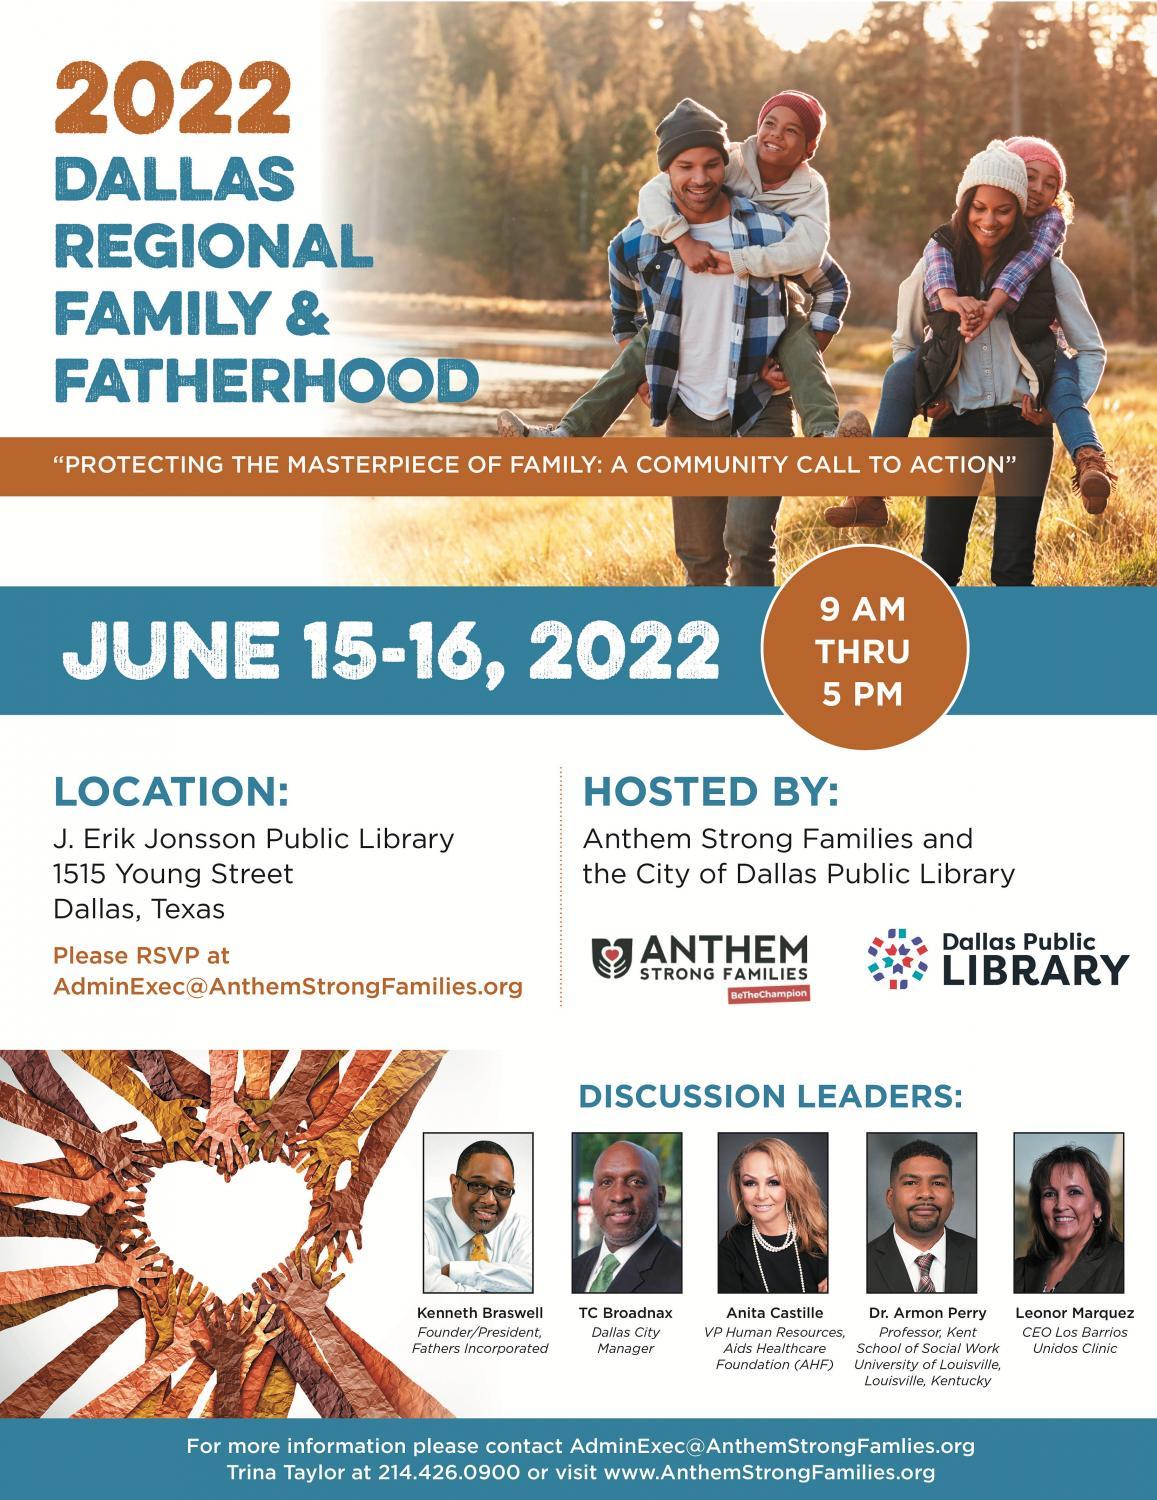 2022 Regional Family and Fatherhood Summit at J. Erik Jonsson Central Library